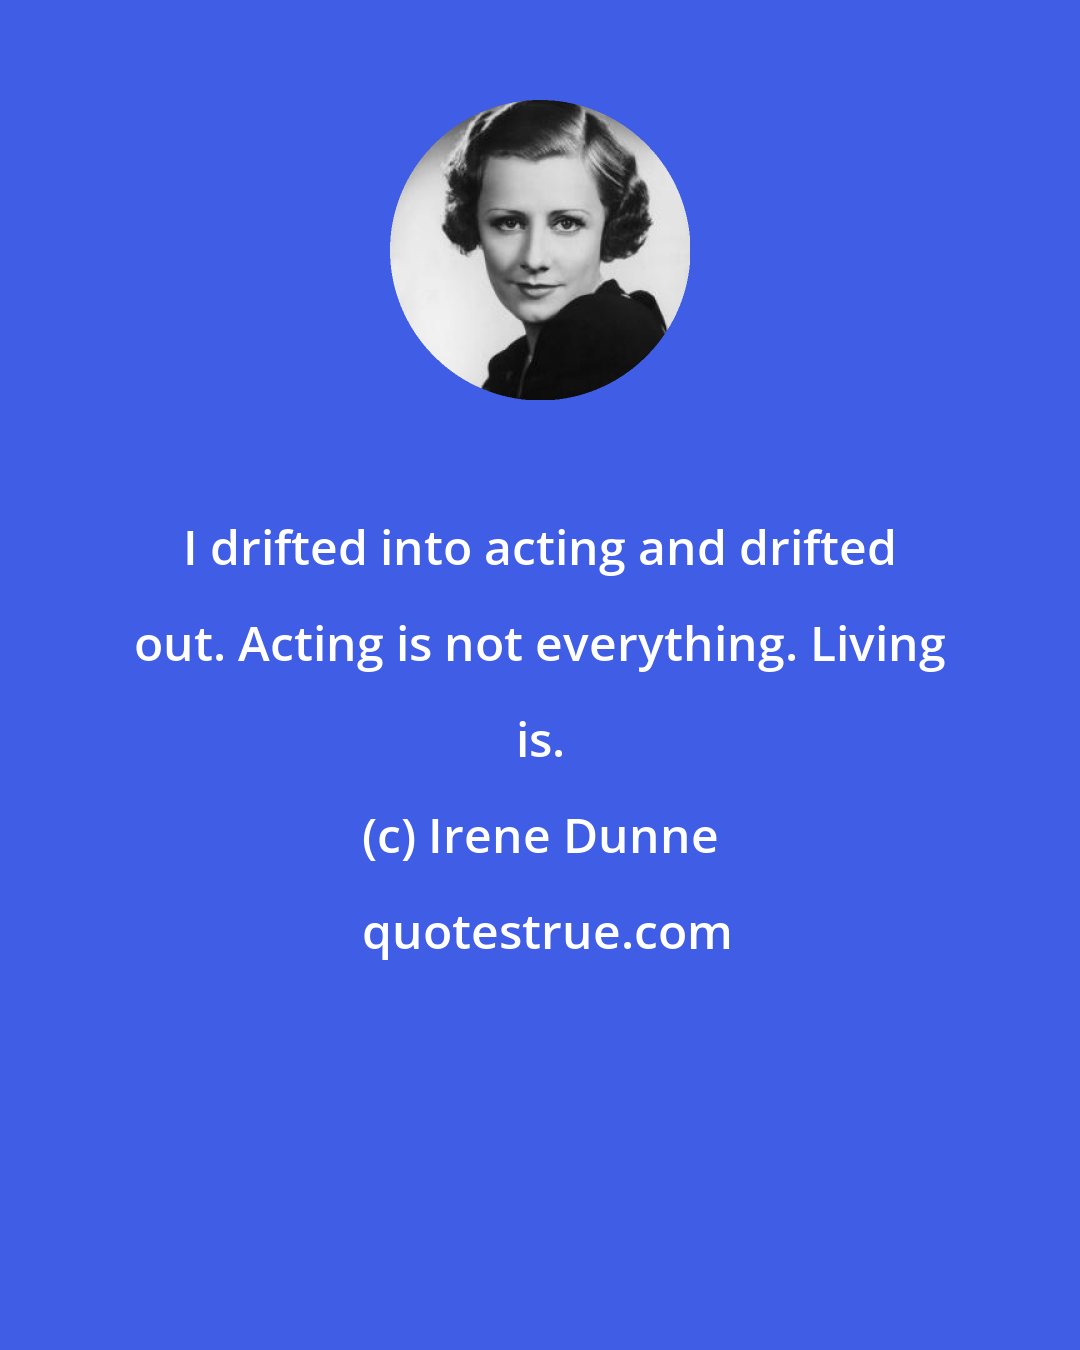 Irene Dunne: I drifted into acting and drifted out. Acting is not everything. Living is.